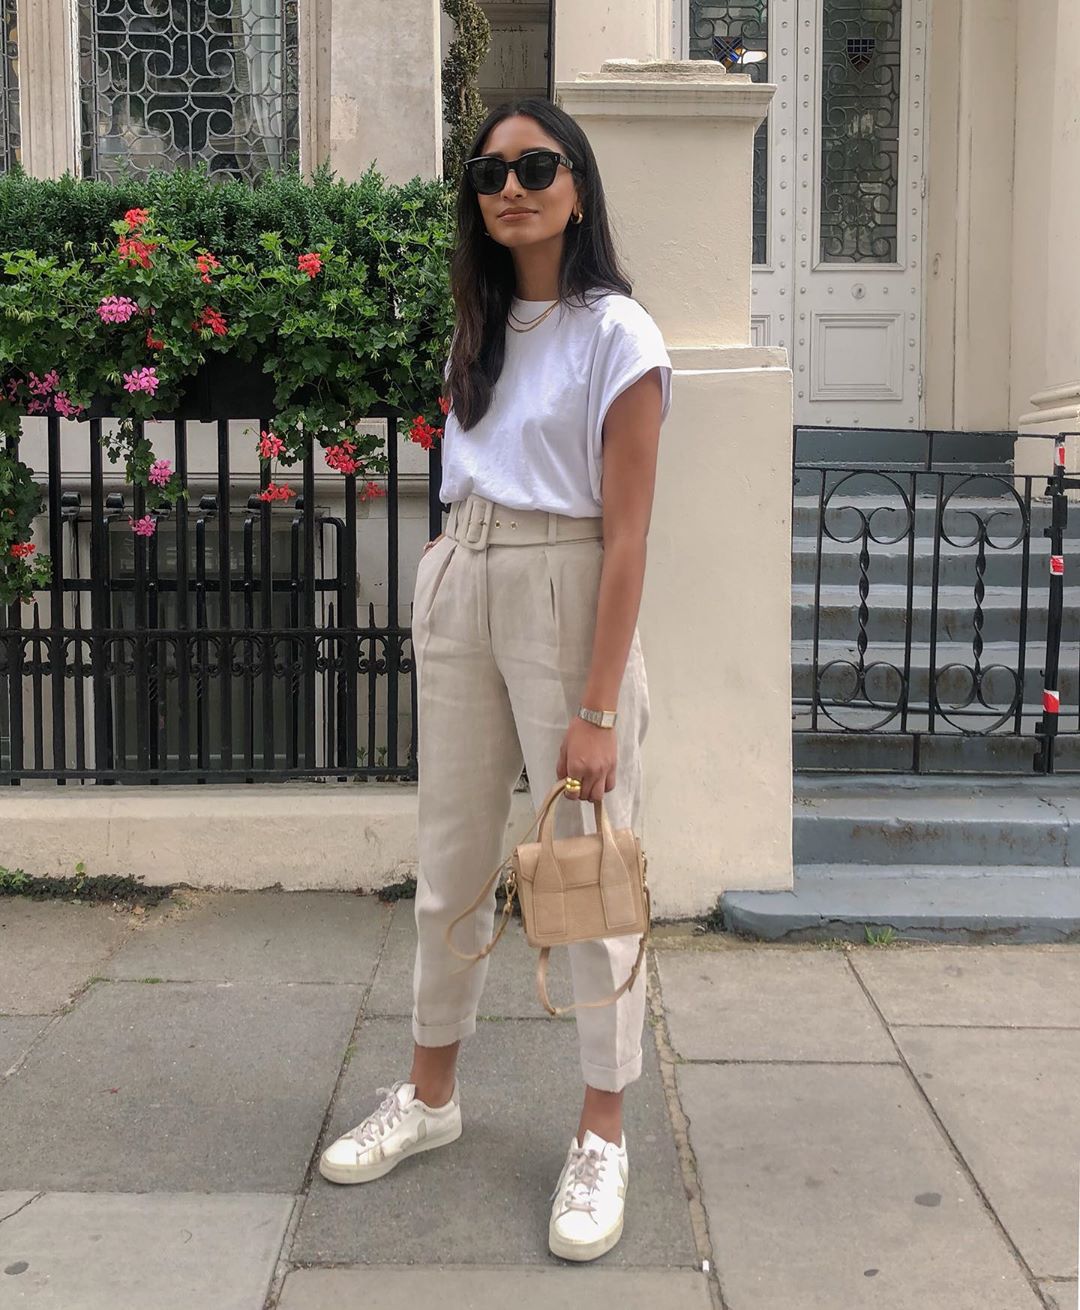 How to Build the Perfect Summer Capsule Wardrobe - The Chroma Network